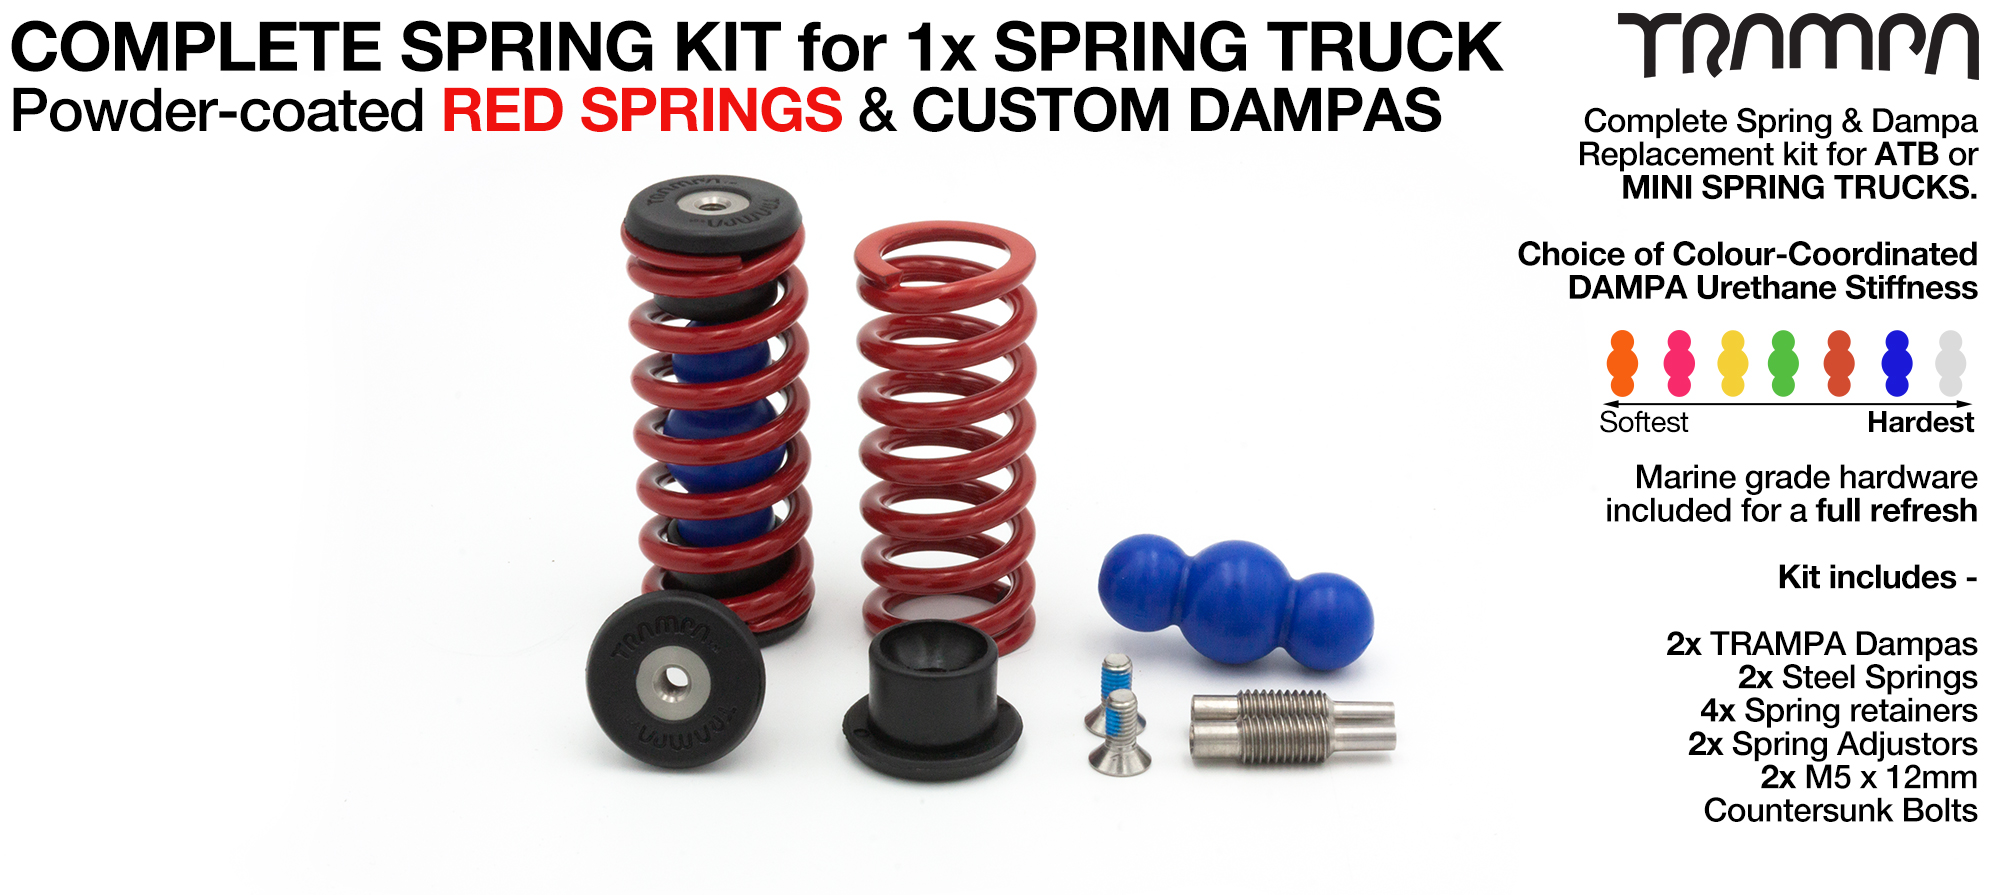 Spring kit Complete for 1x Truck - 2x Spring 2x Dampa 4x Spring Retainers 2x Spring Adjuster & 2 M5x12mm Countersunk Bolt  RED Springs